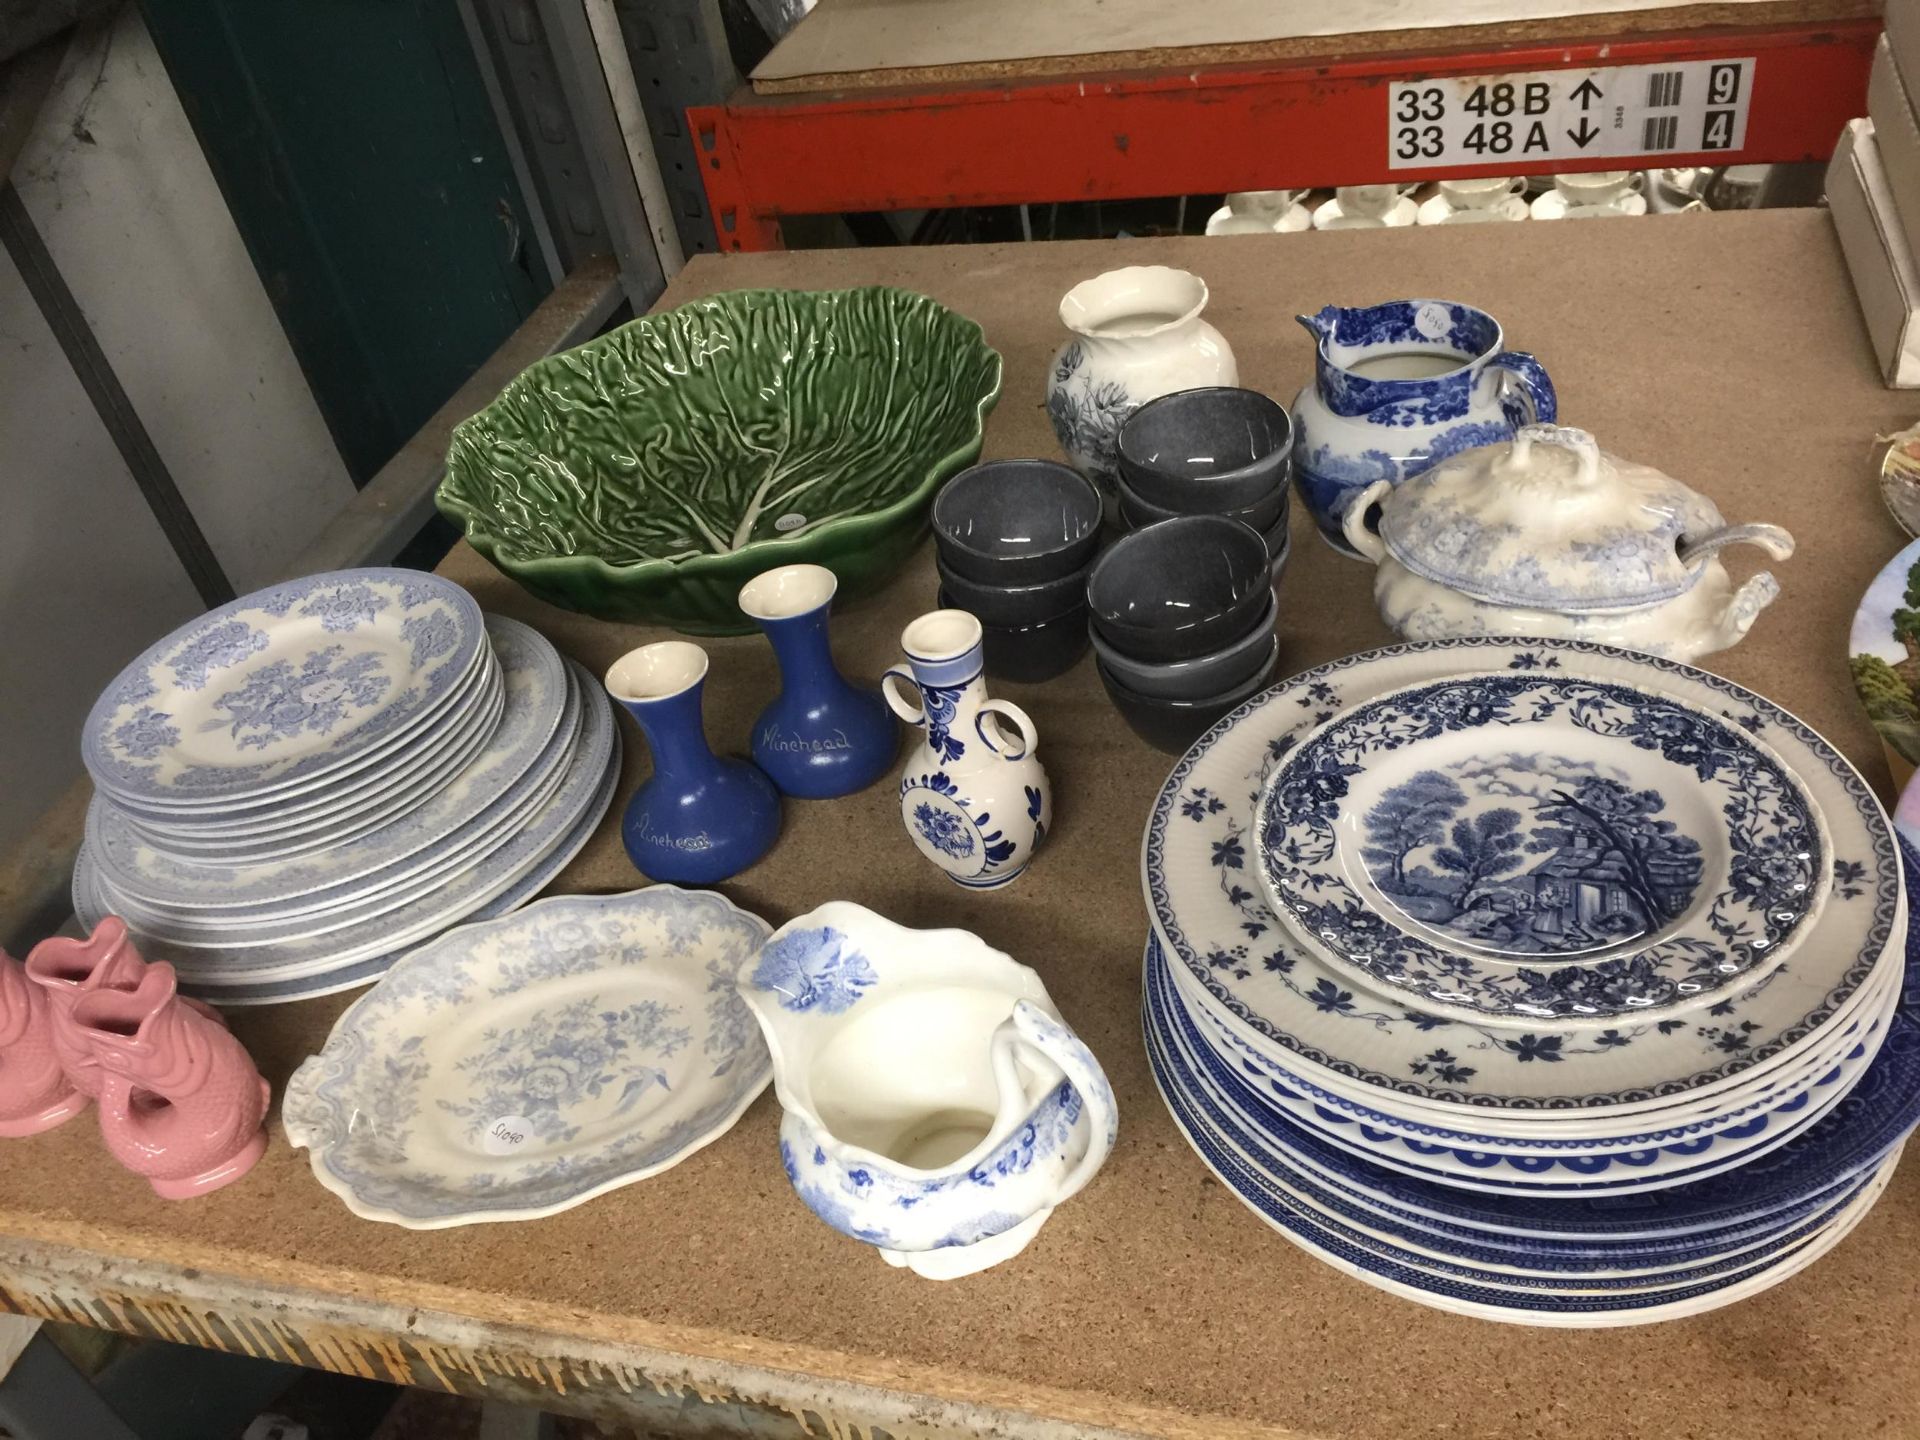 A LARGE QUANTITY OF CERAMICS TO INCLUDE PLATES, JUGS, VASES, ETC - Image 2 of 5